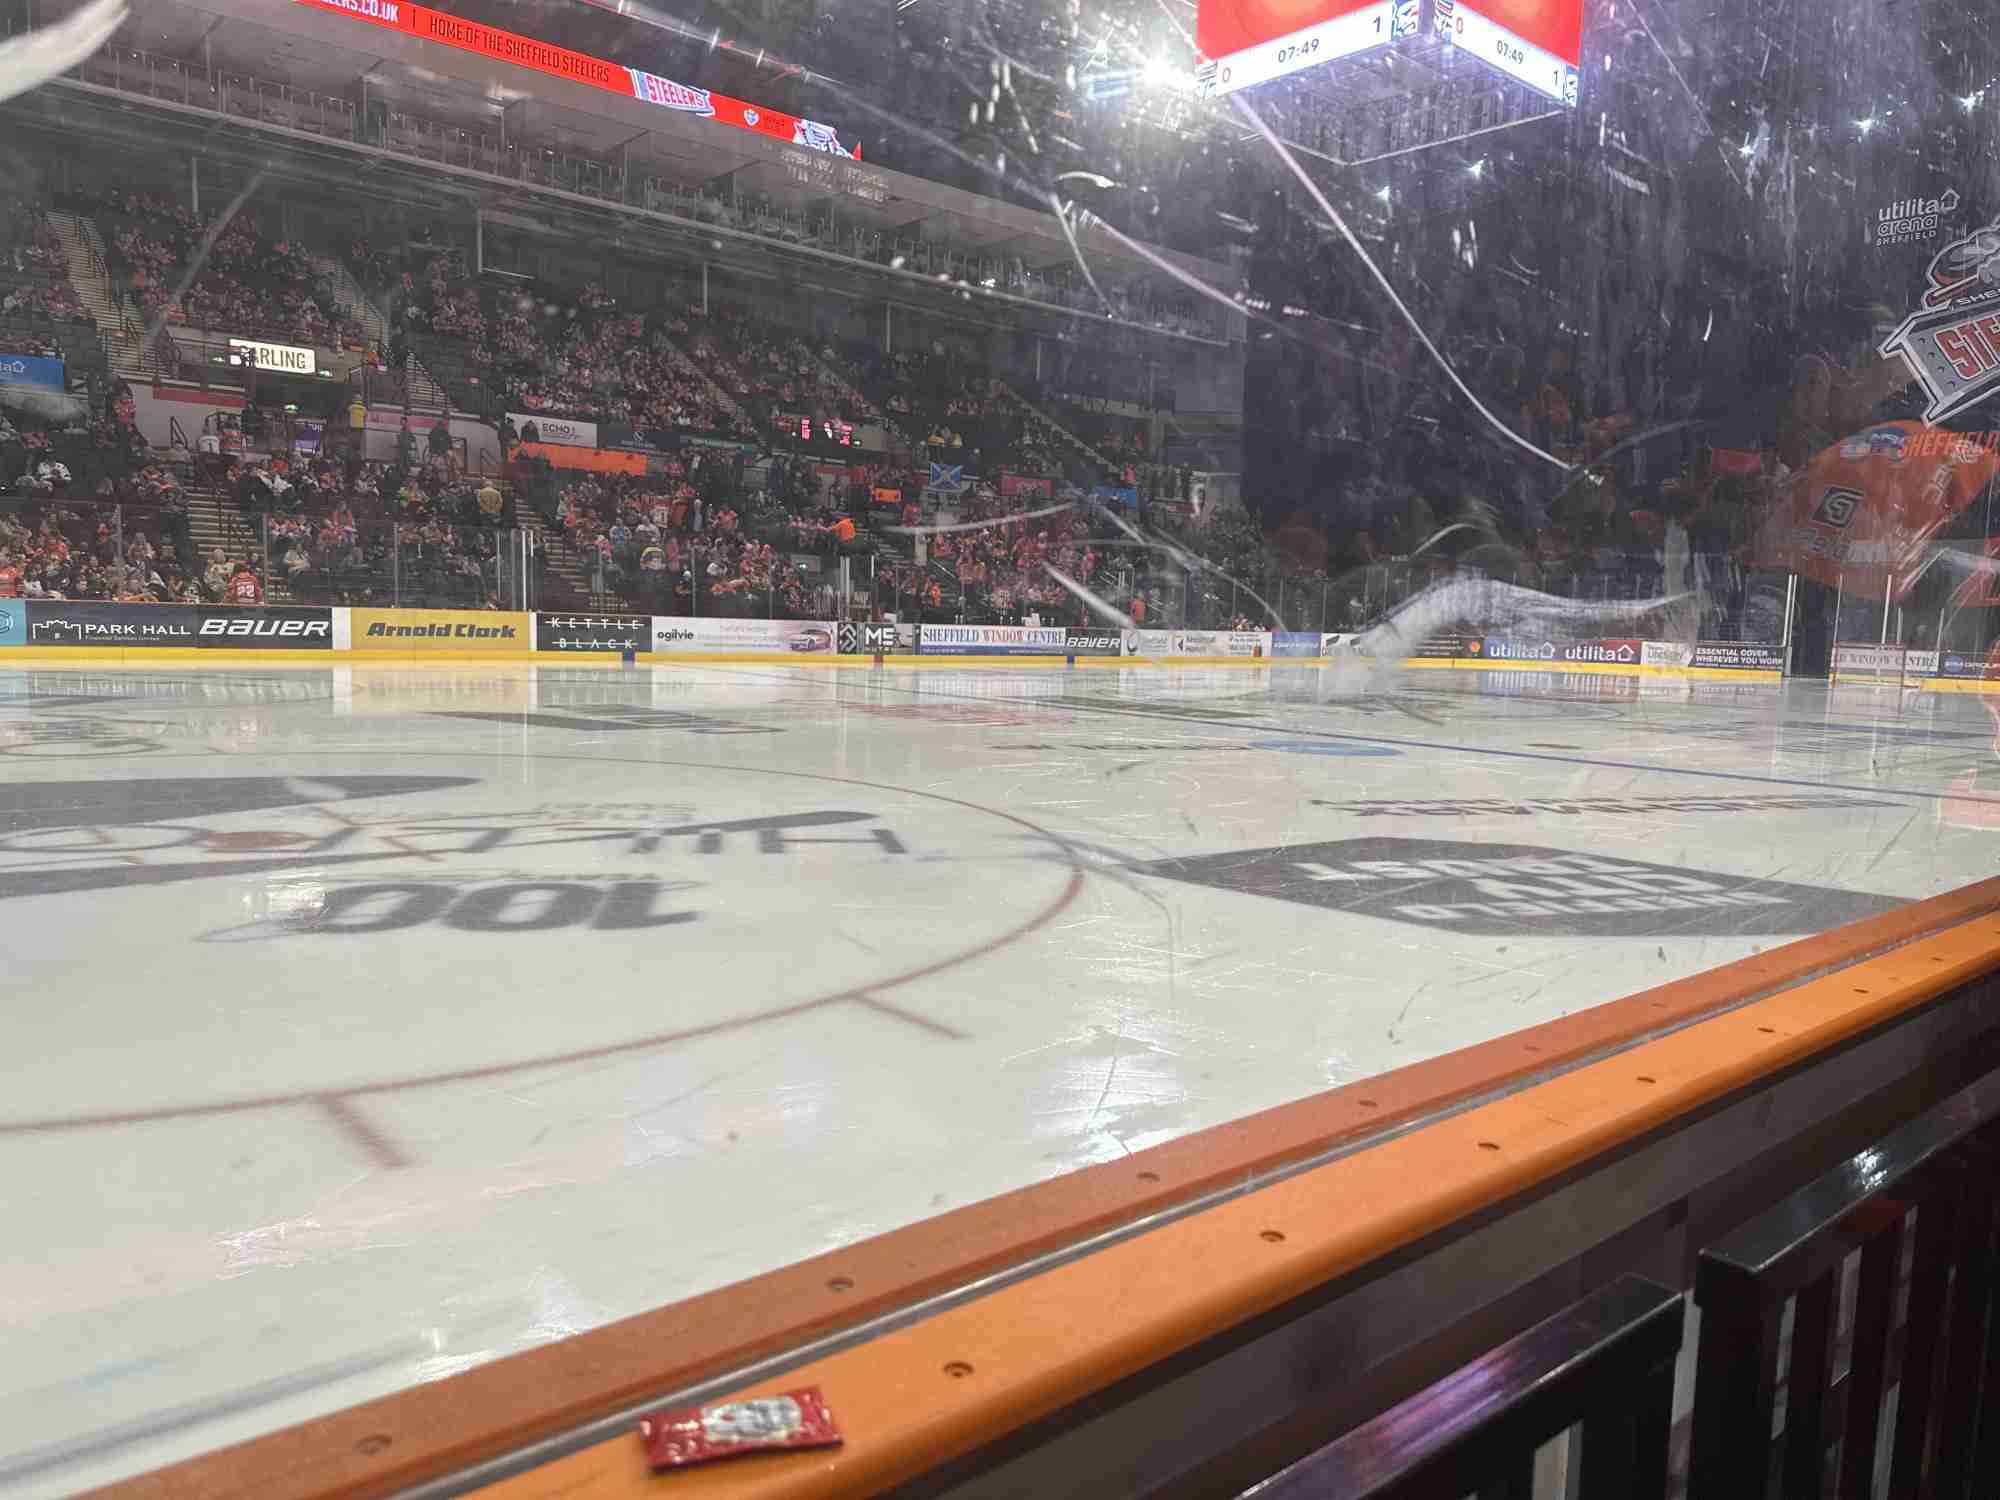 View of Sheffield Steelers (Ice Hockey) at Utilita Arena Sheffield from Seat Block 115, Row A, Seat 7